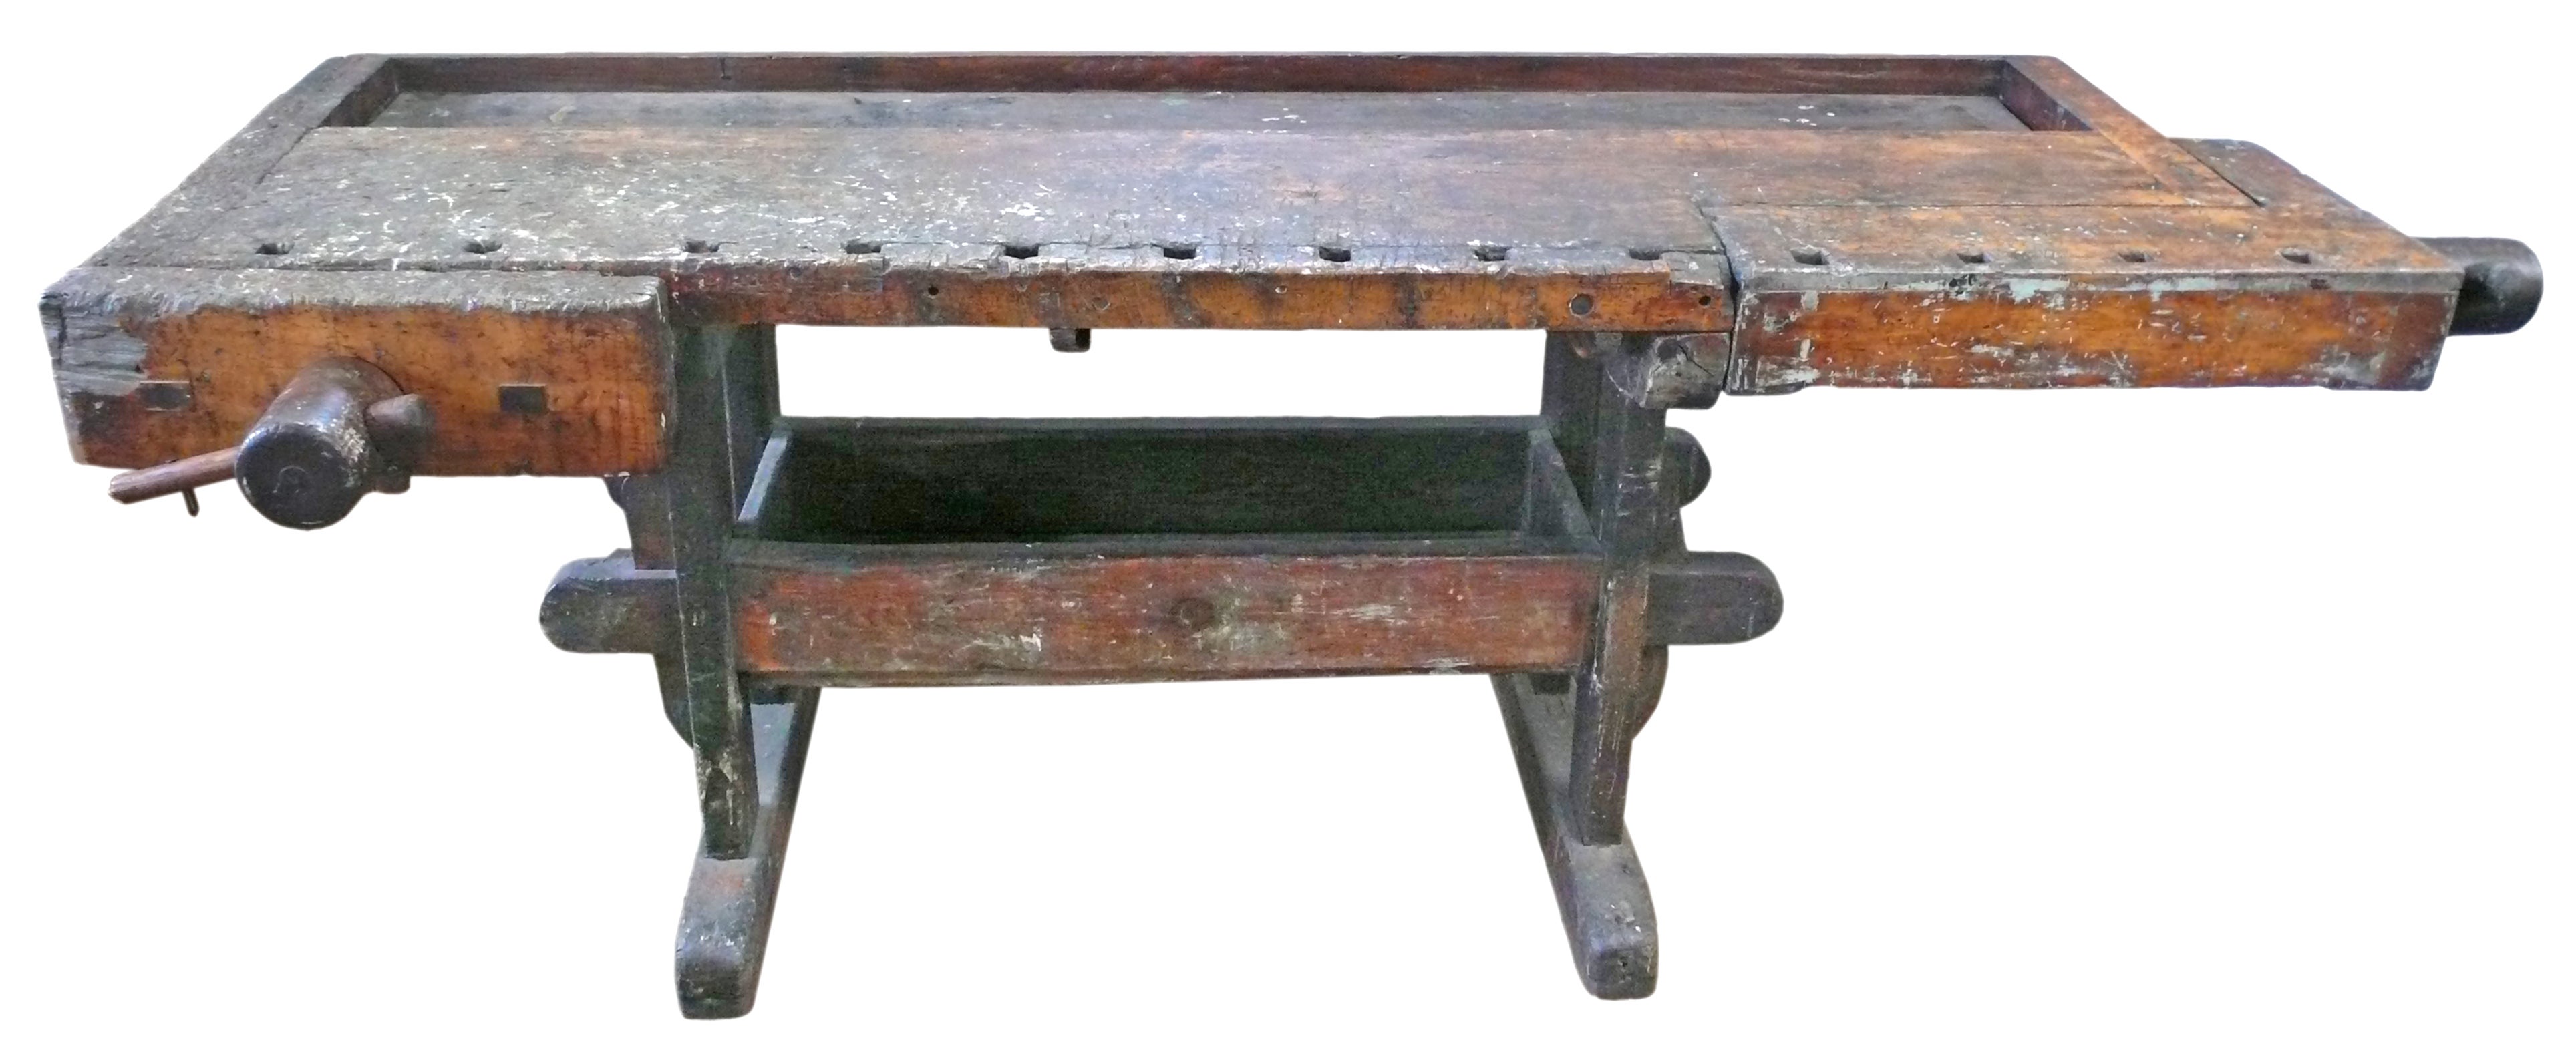 Exceptional Early 20th Century Primitive Workbench